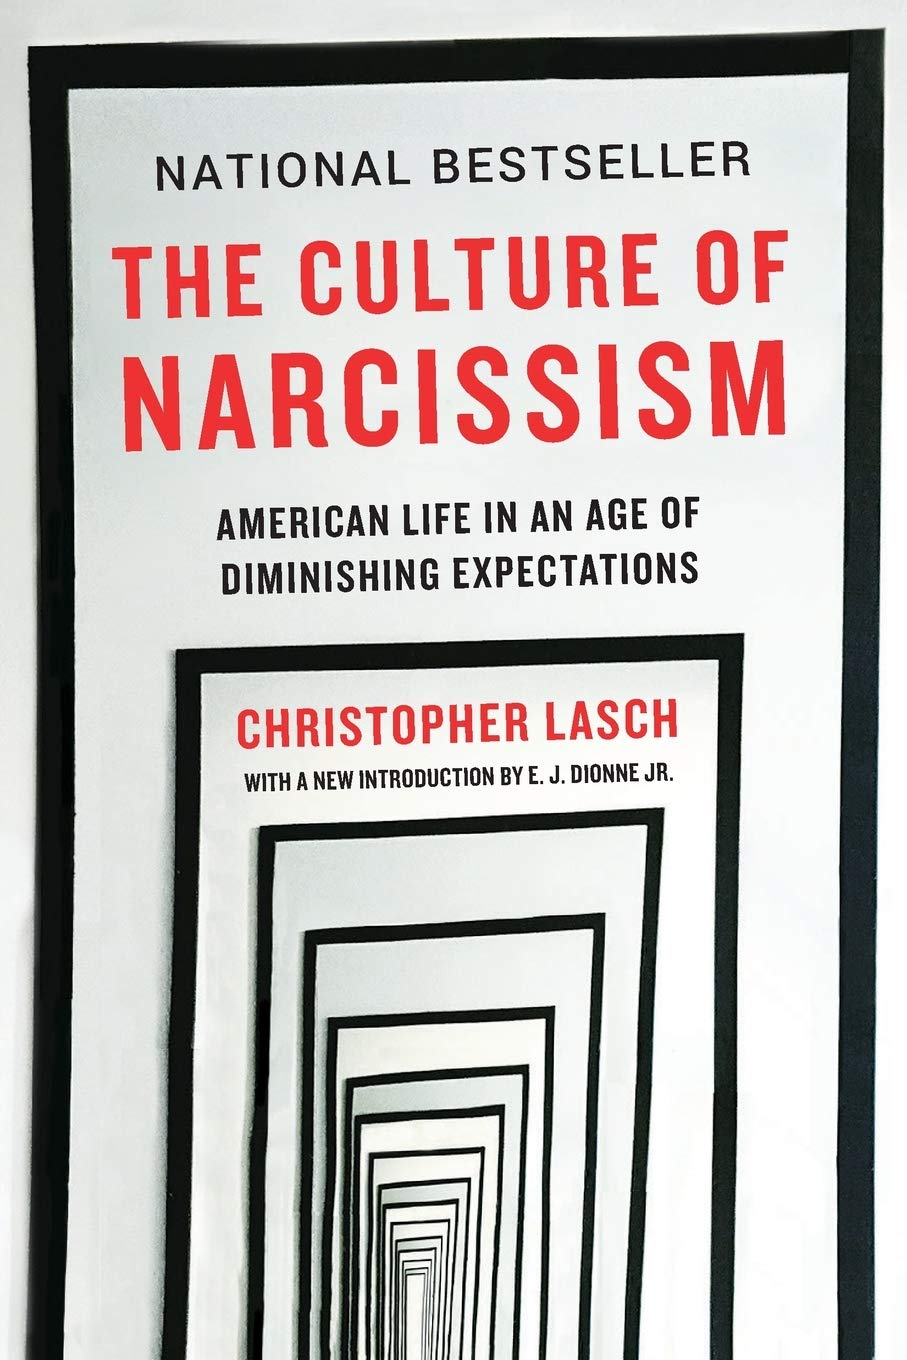 The Culture of Narcissism // American Life in an Age of Diminishing Expectations